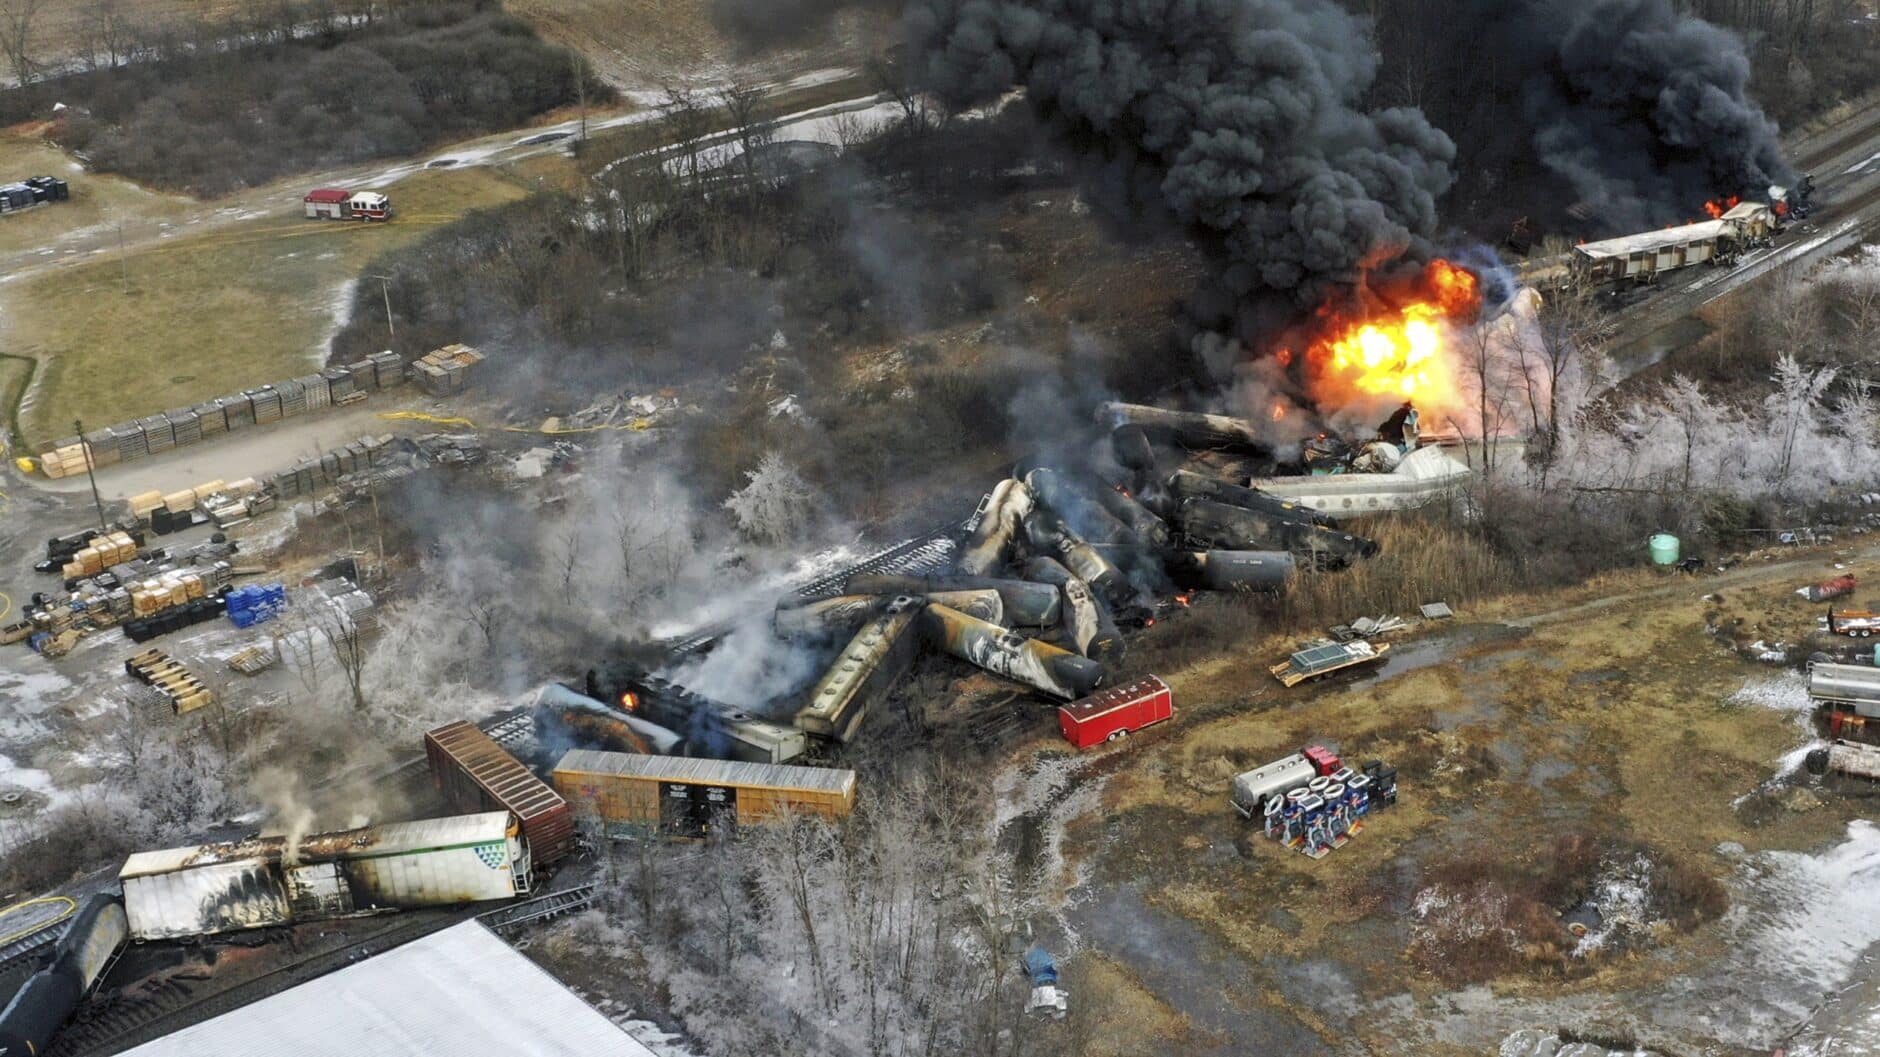 Feds take control of Ohio train wreck cleanup Courthouse News Service